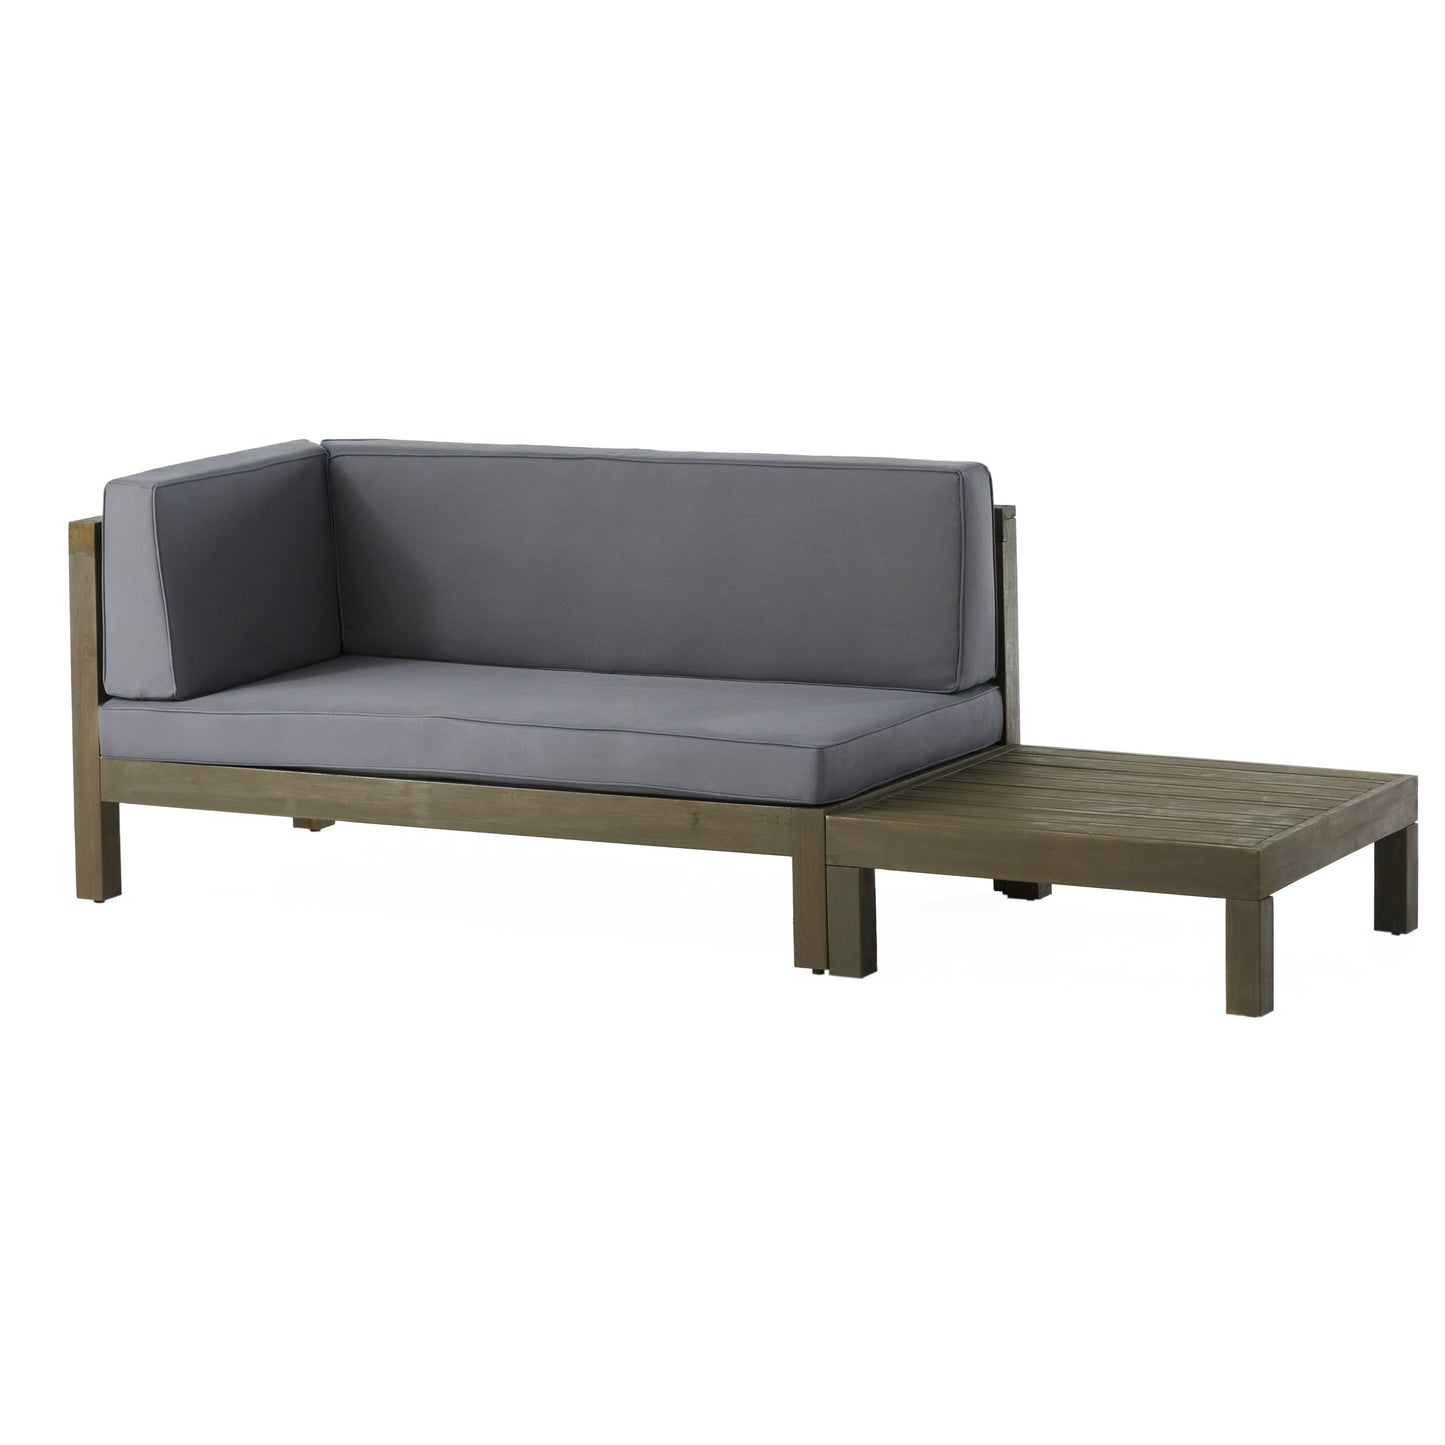 Cascada Outdoor Acacia Wood Left Arm Loveseat and Coffee Table Set with Cushion